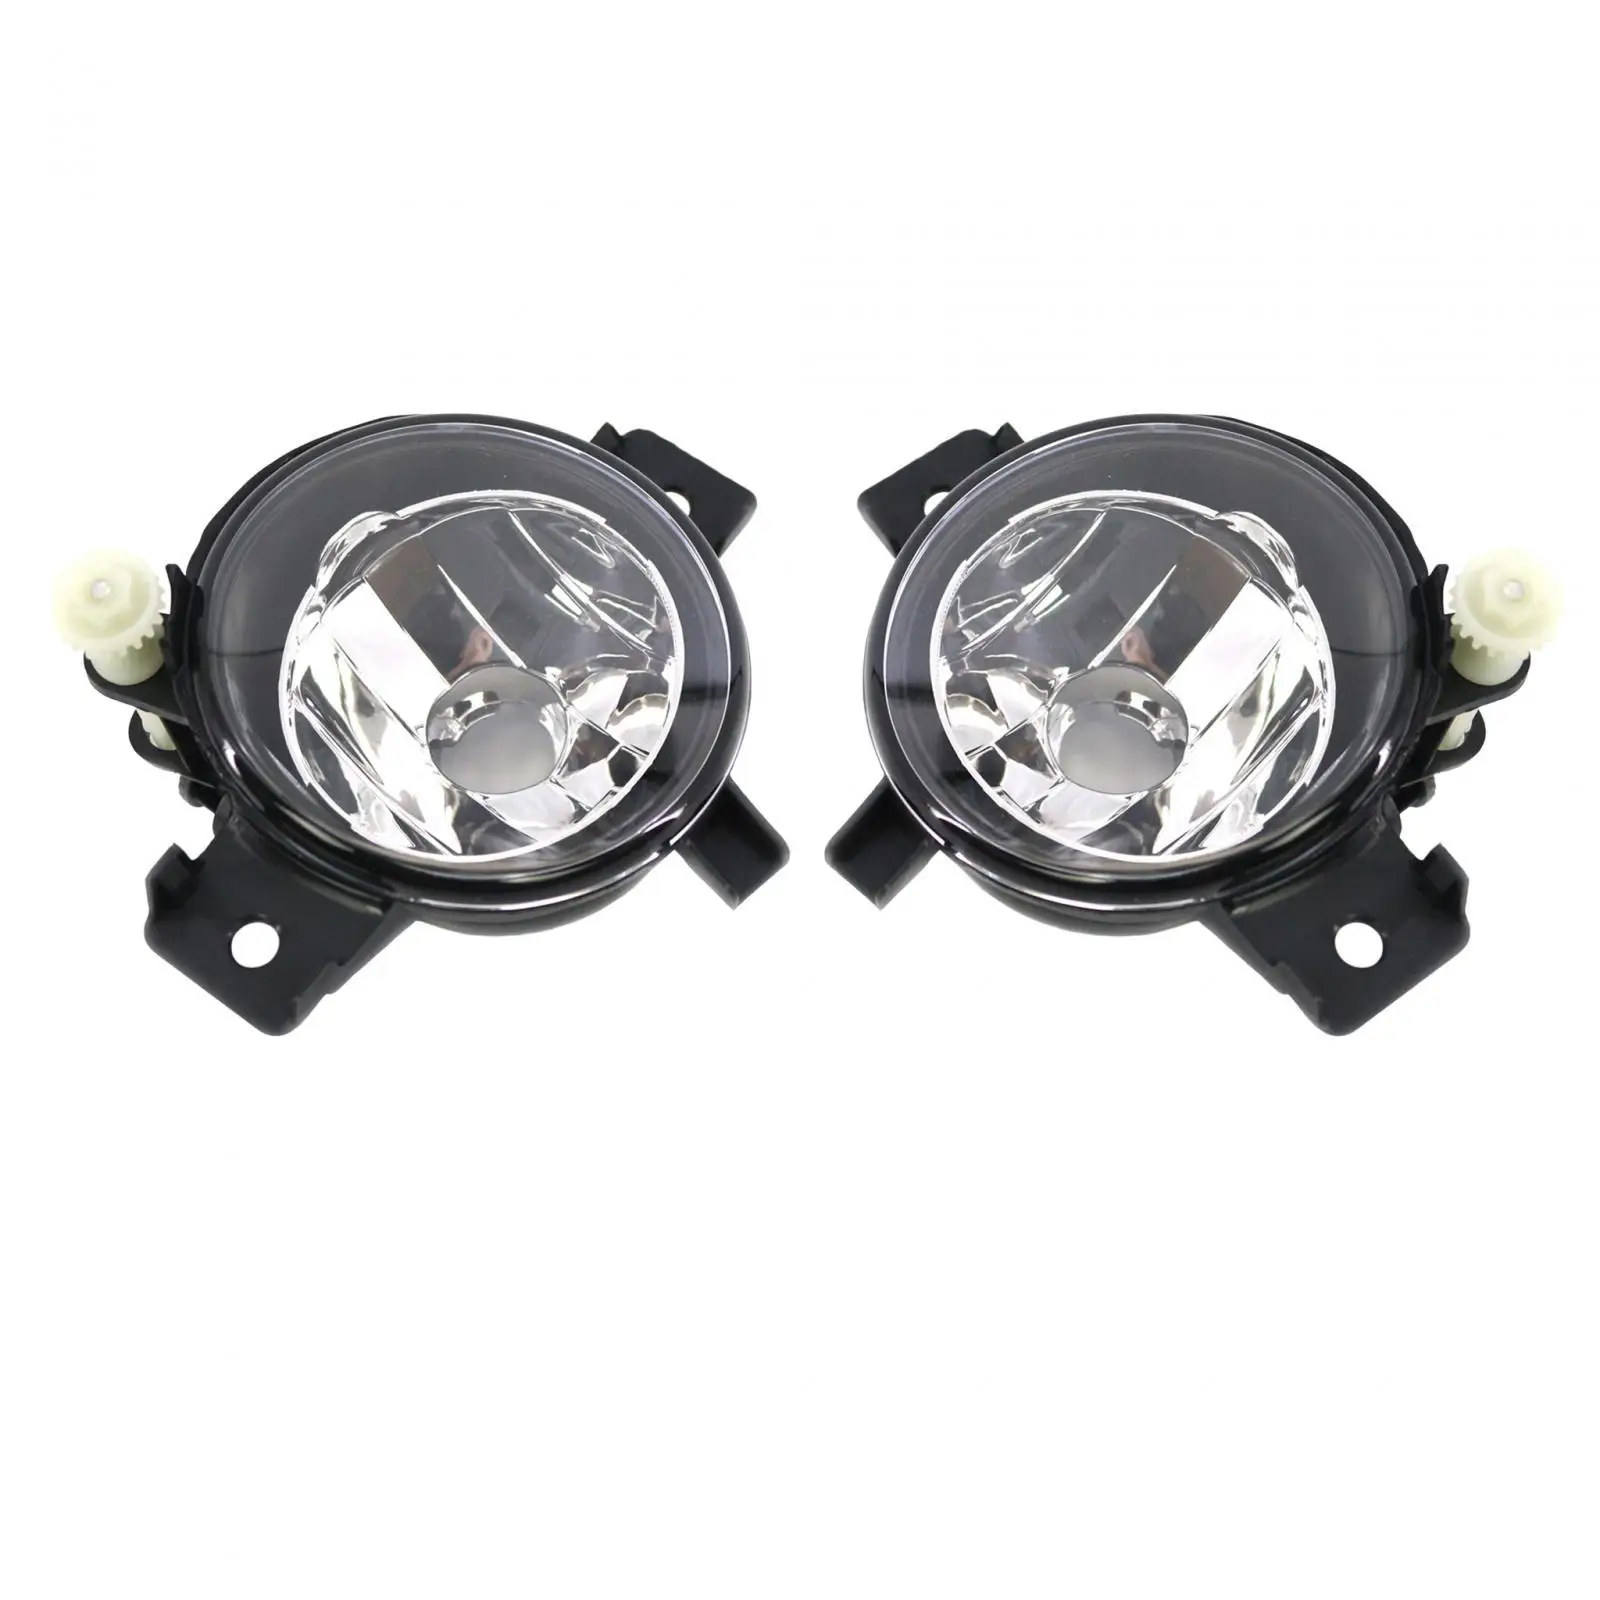 

Car Front Fog Light Supplies Direct Replaces High Performance Durable Easy to Install Fog Lamp Assembly for BMW x5 E70